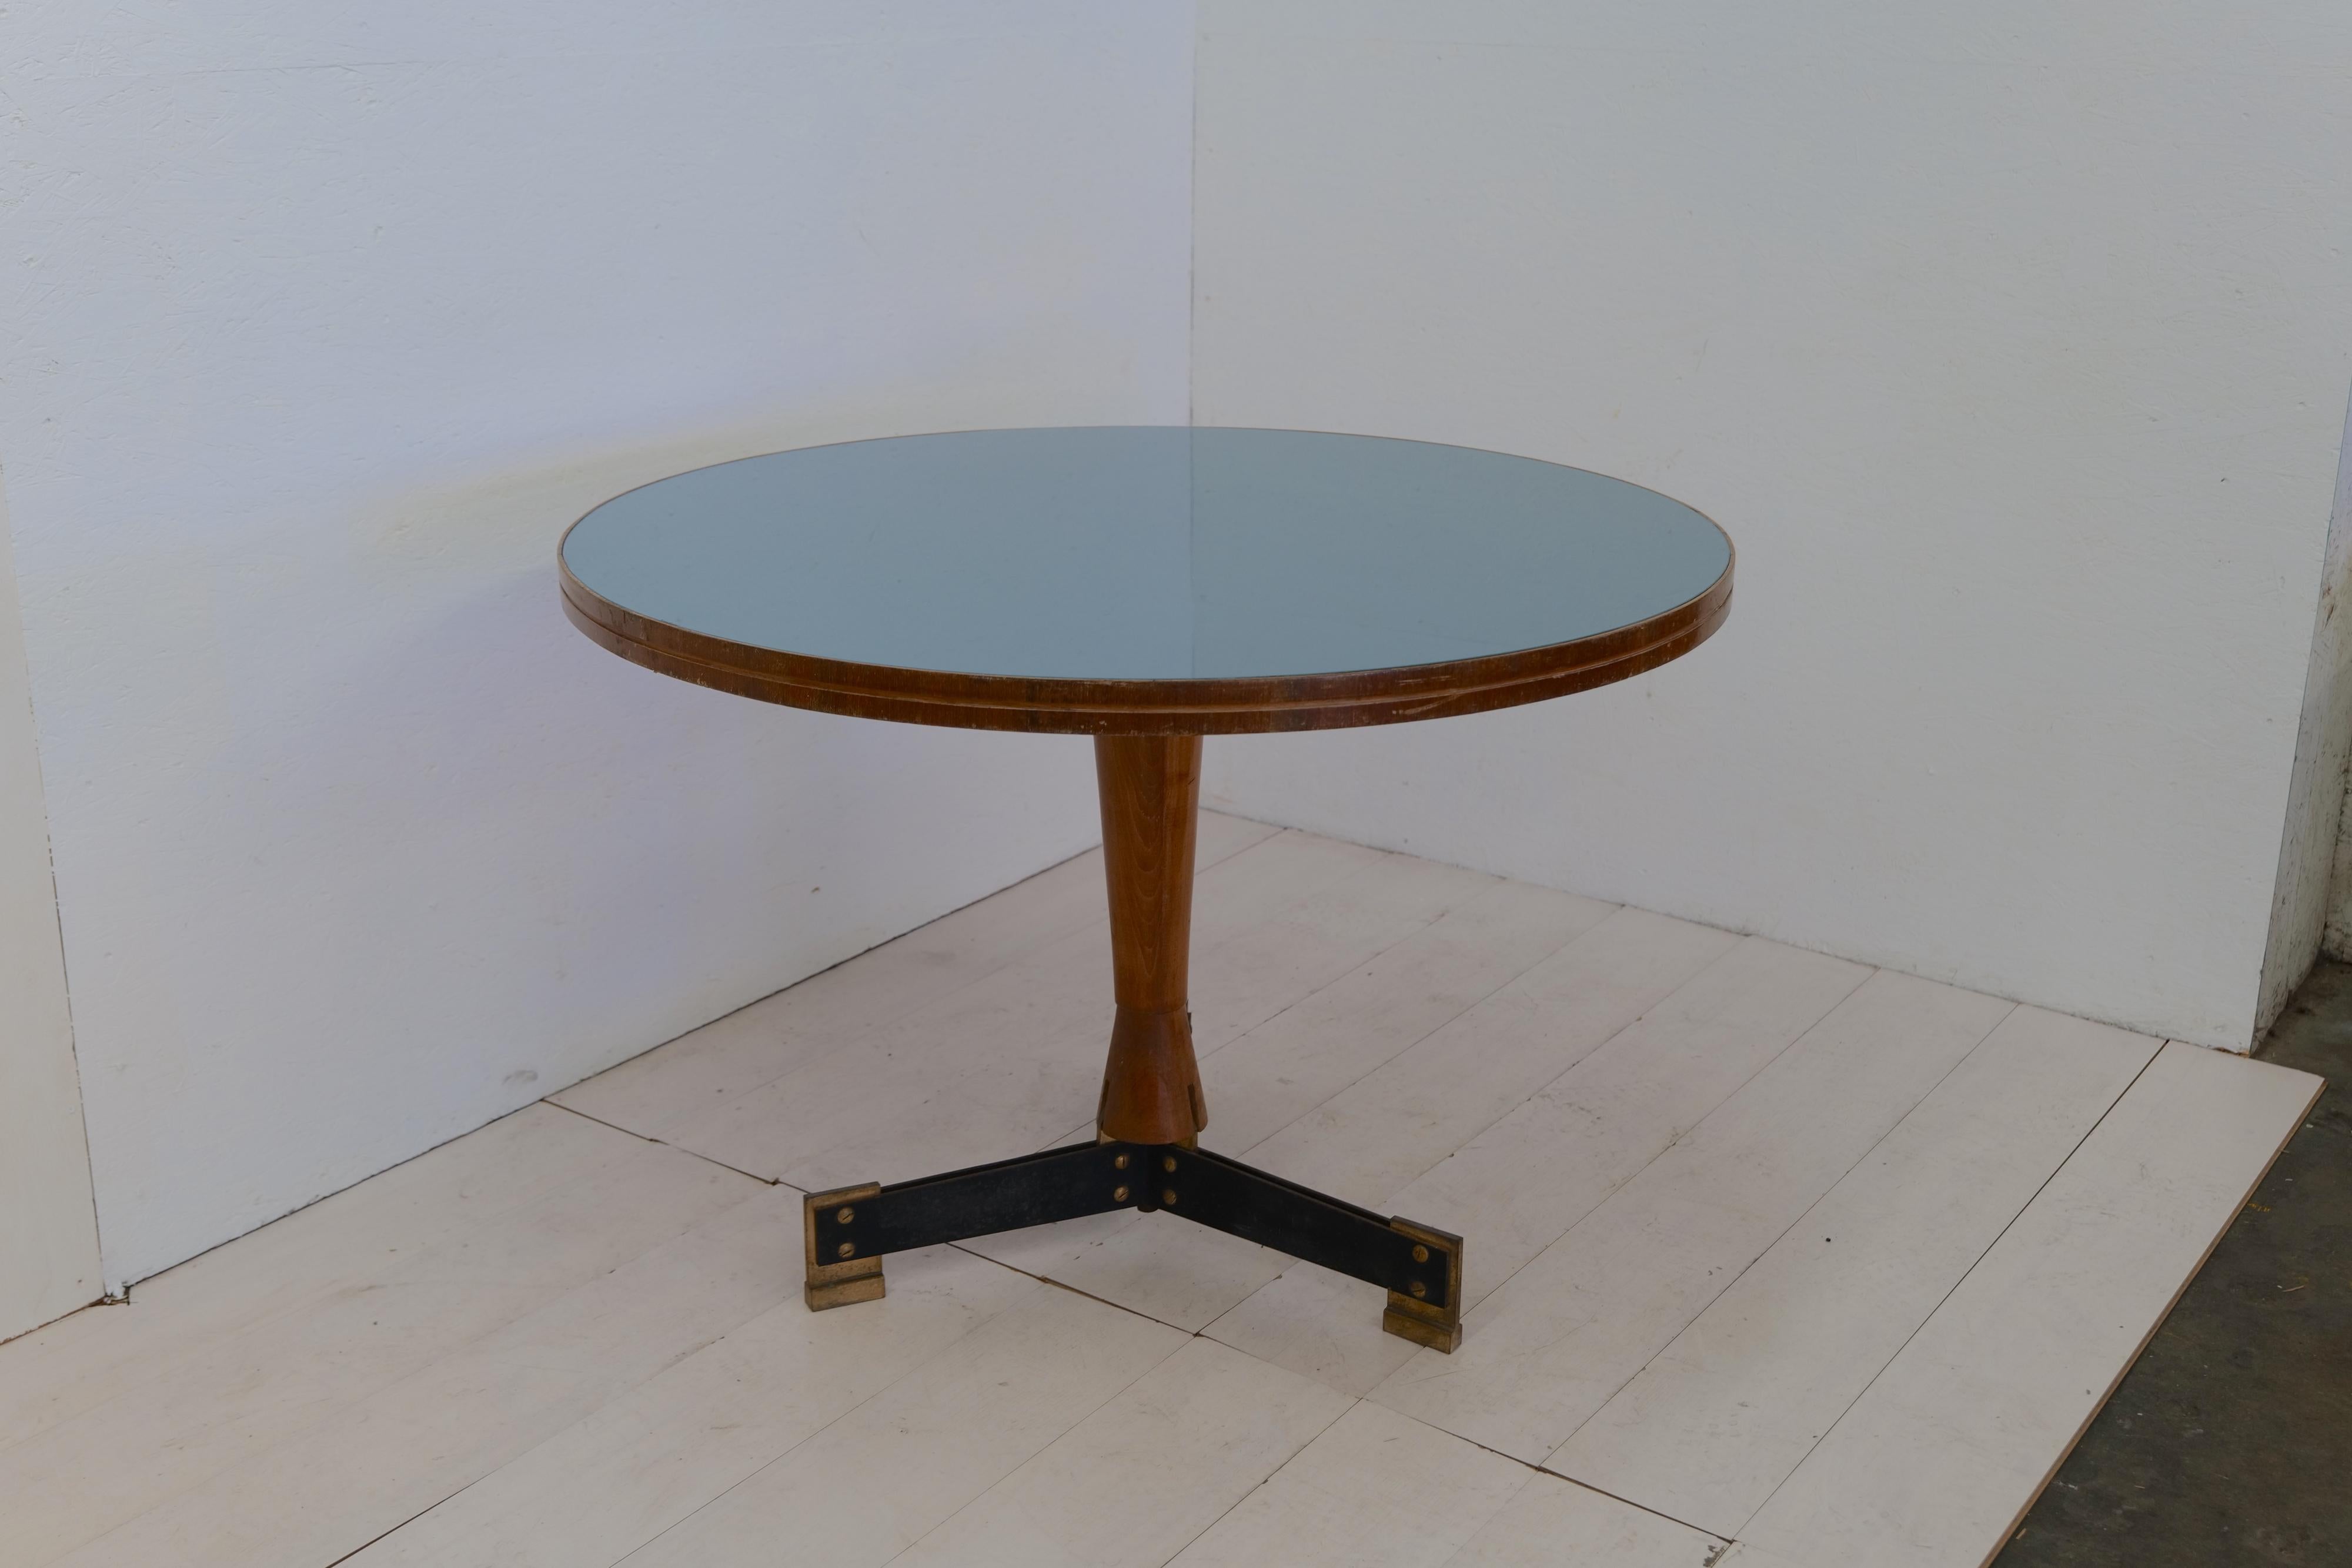 The midcentury Italian dining table by Ignazio Gardella, crafted in Italy during the 1950s, is a testament to timeless design and exceptional craftsmanship. Designed by Ignazio Gardella, a renowned Italian architect, this dining table showcases